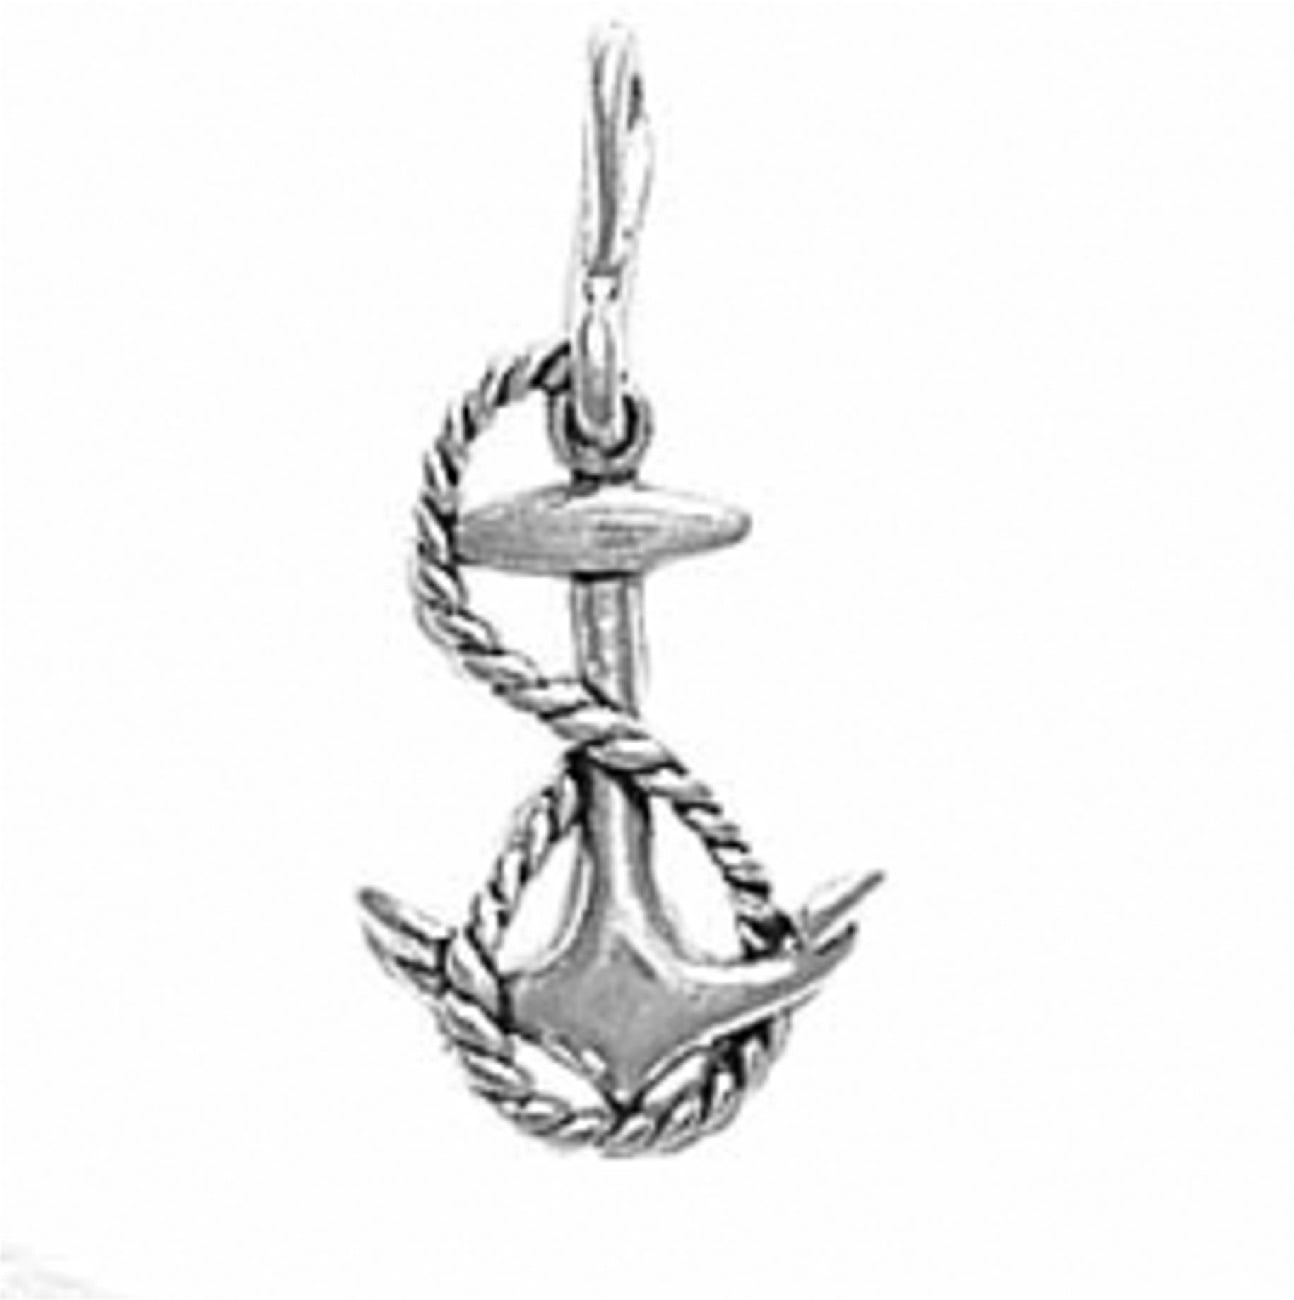 .925 Sterling Silver Rope and Anchor Charm. 